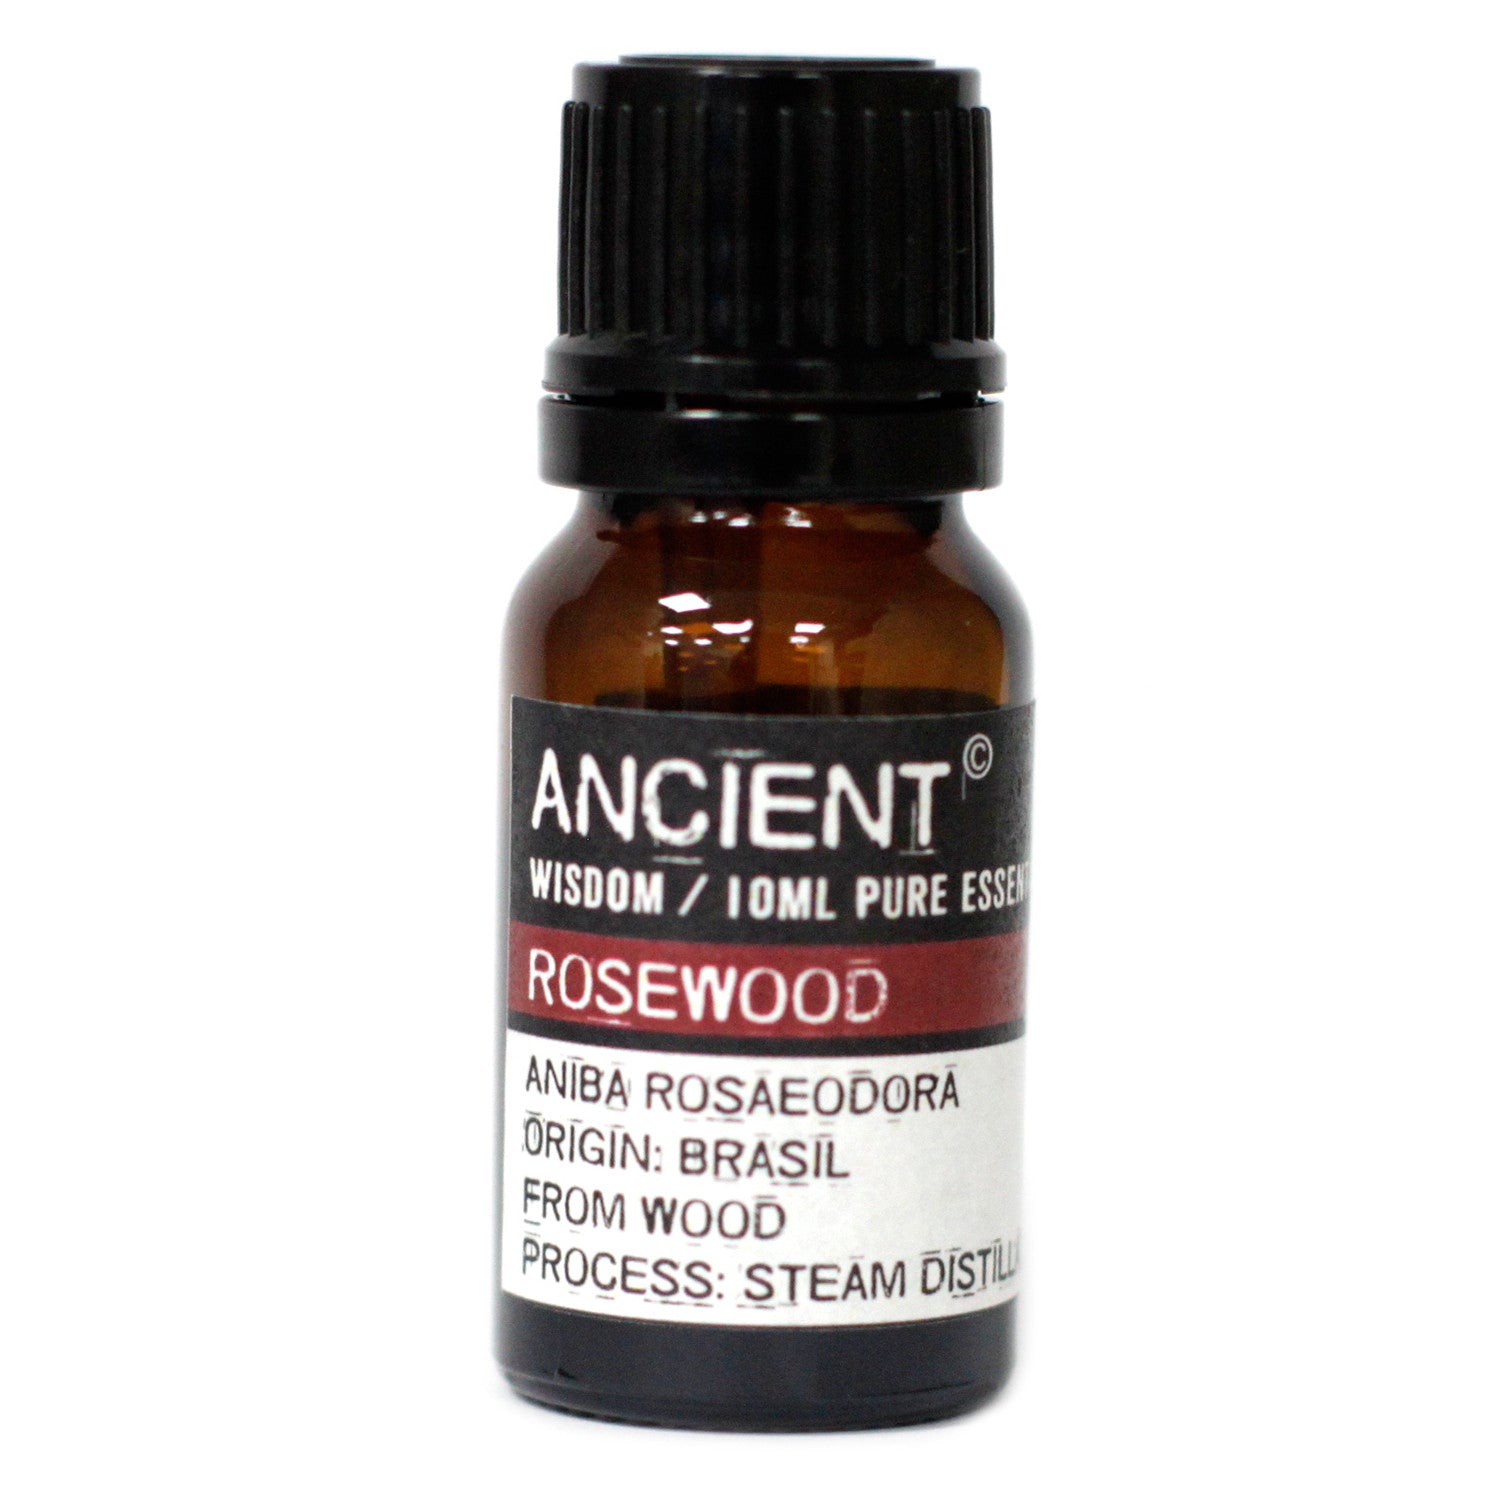 View 10 ml Rosewood Essential Oil information